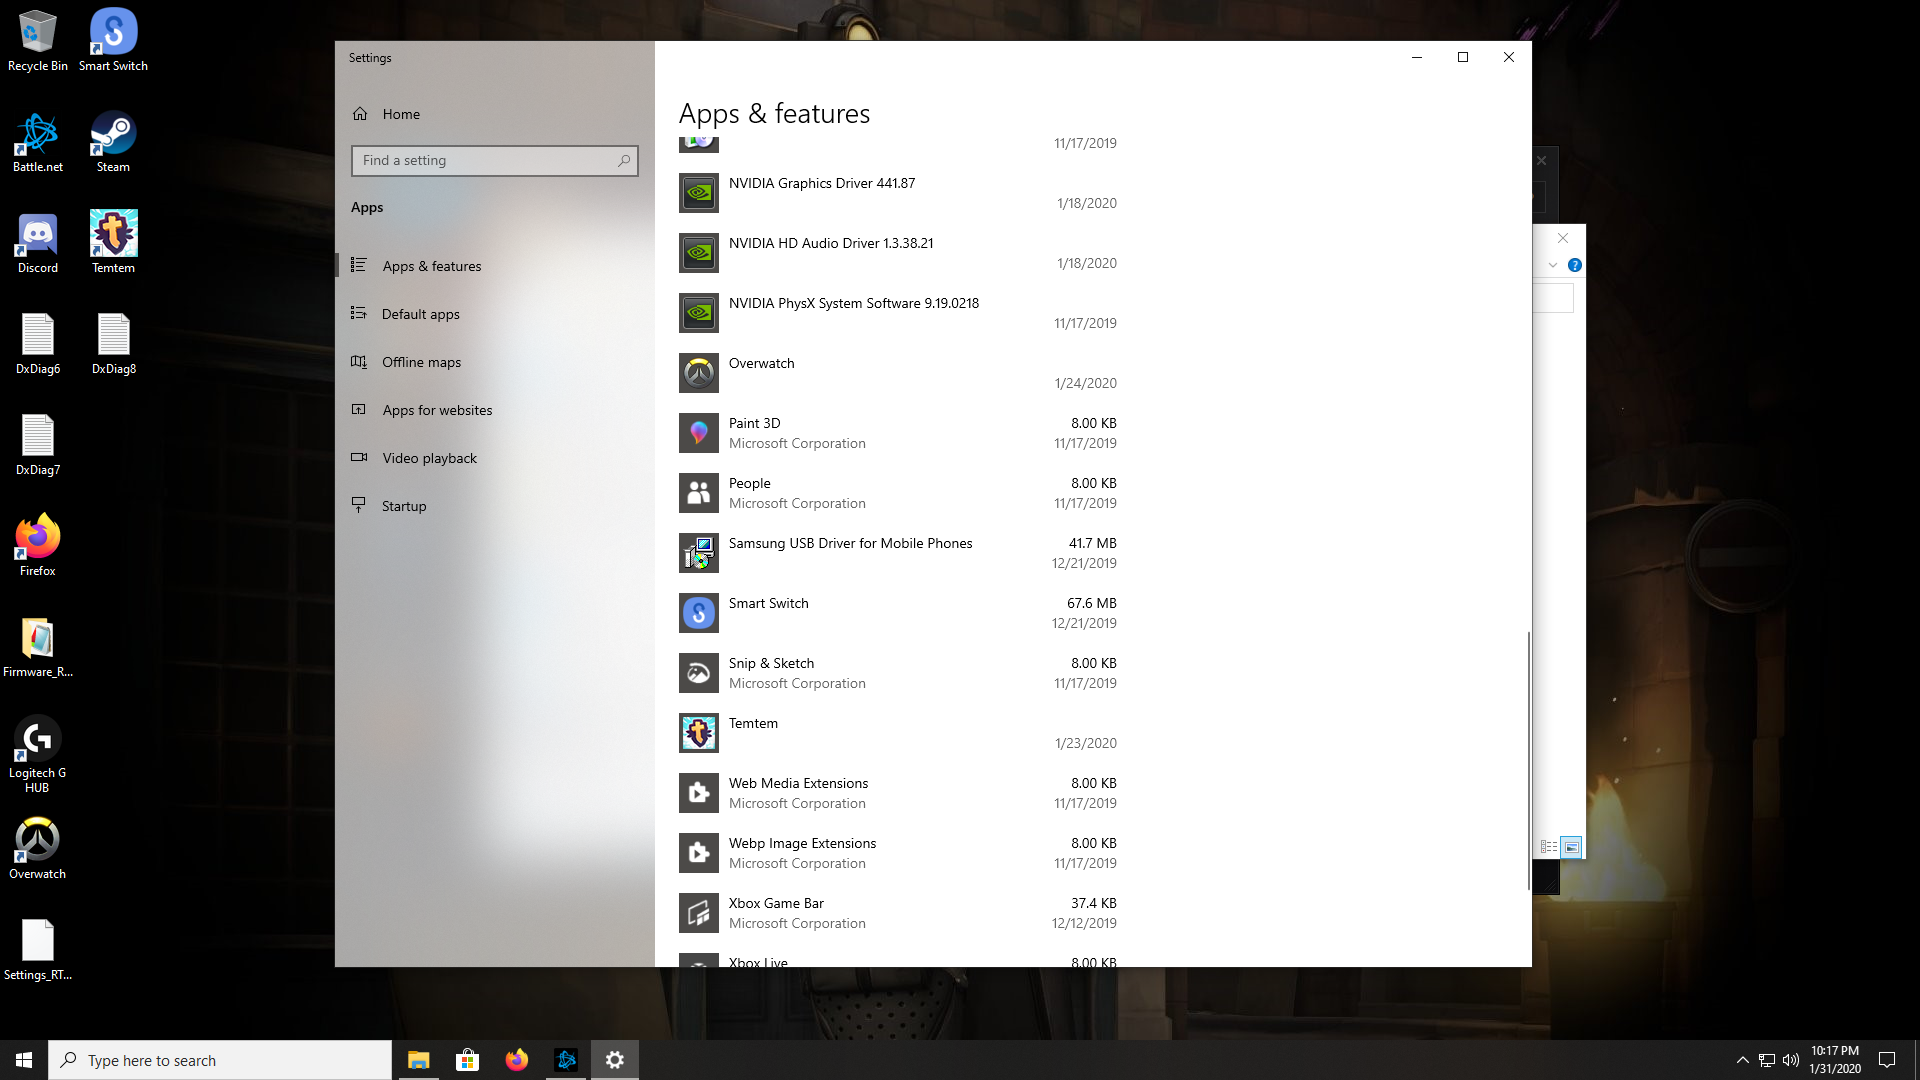 Steam is missing from program/apps list 074af69b-d065-4a80-87fb-d004b3ceab41?upload=true.png